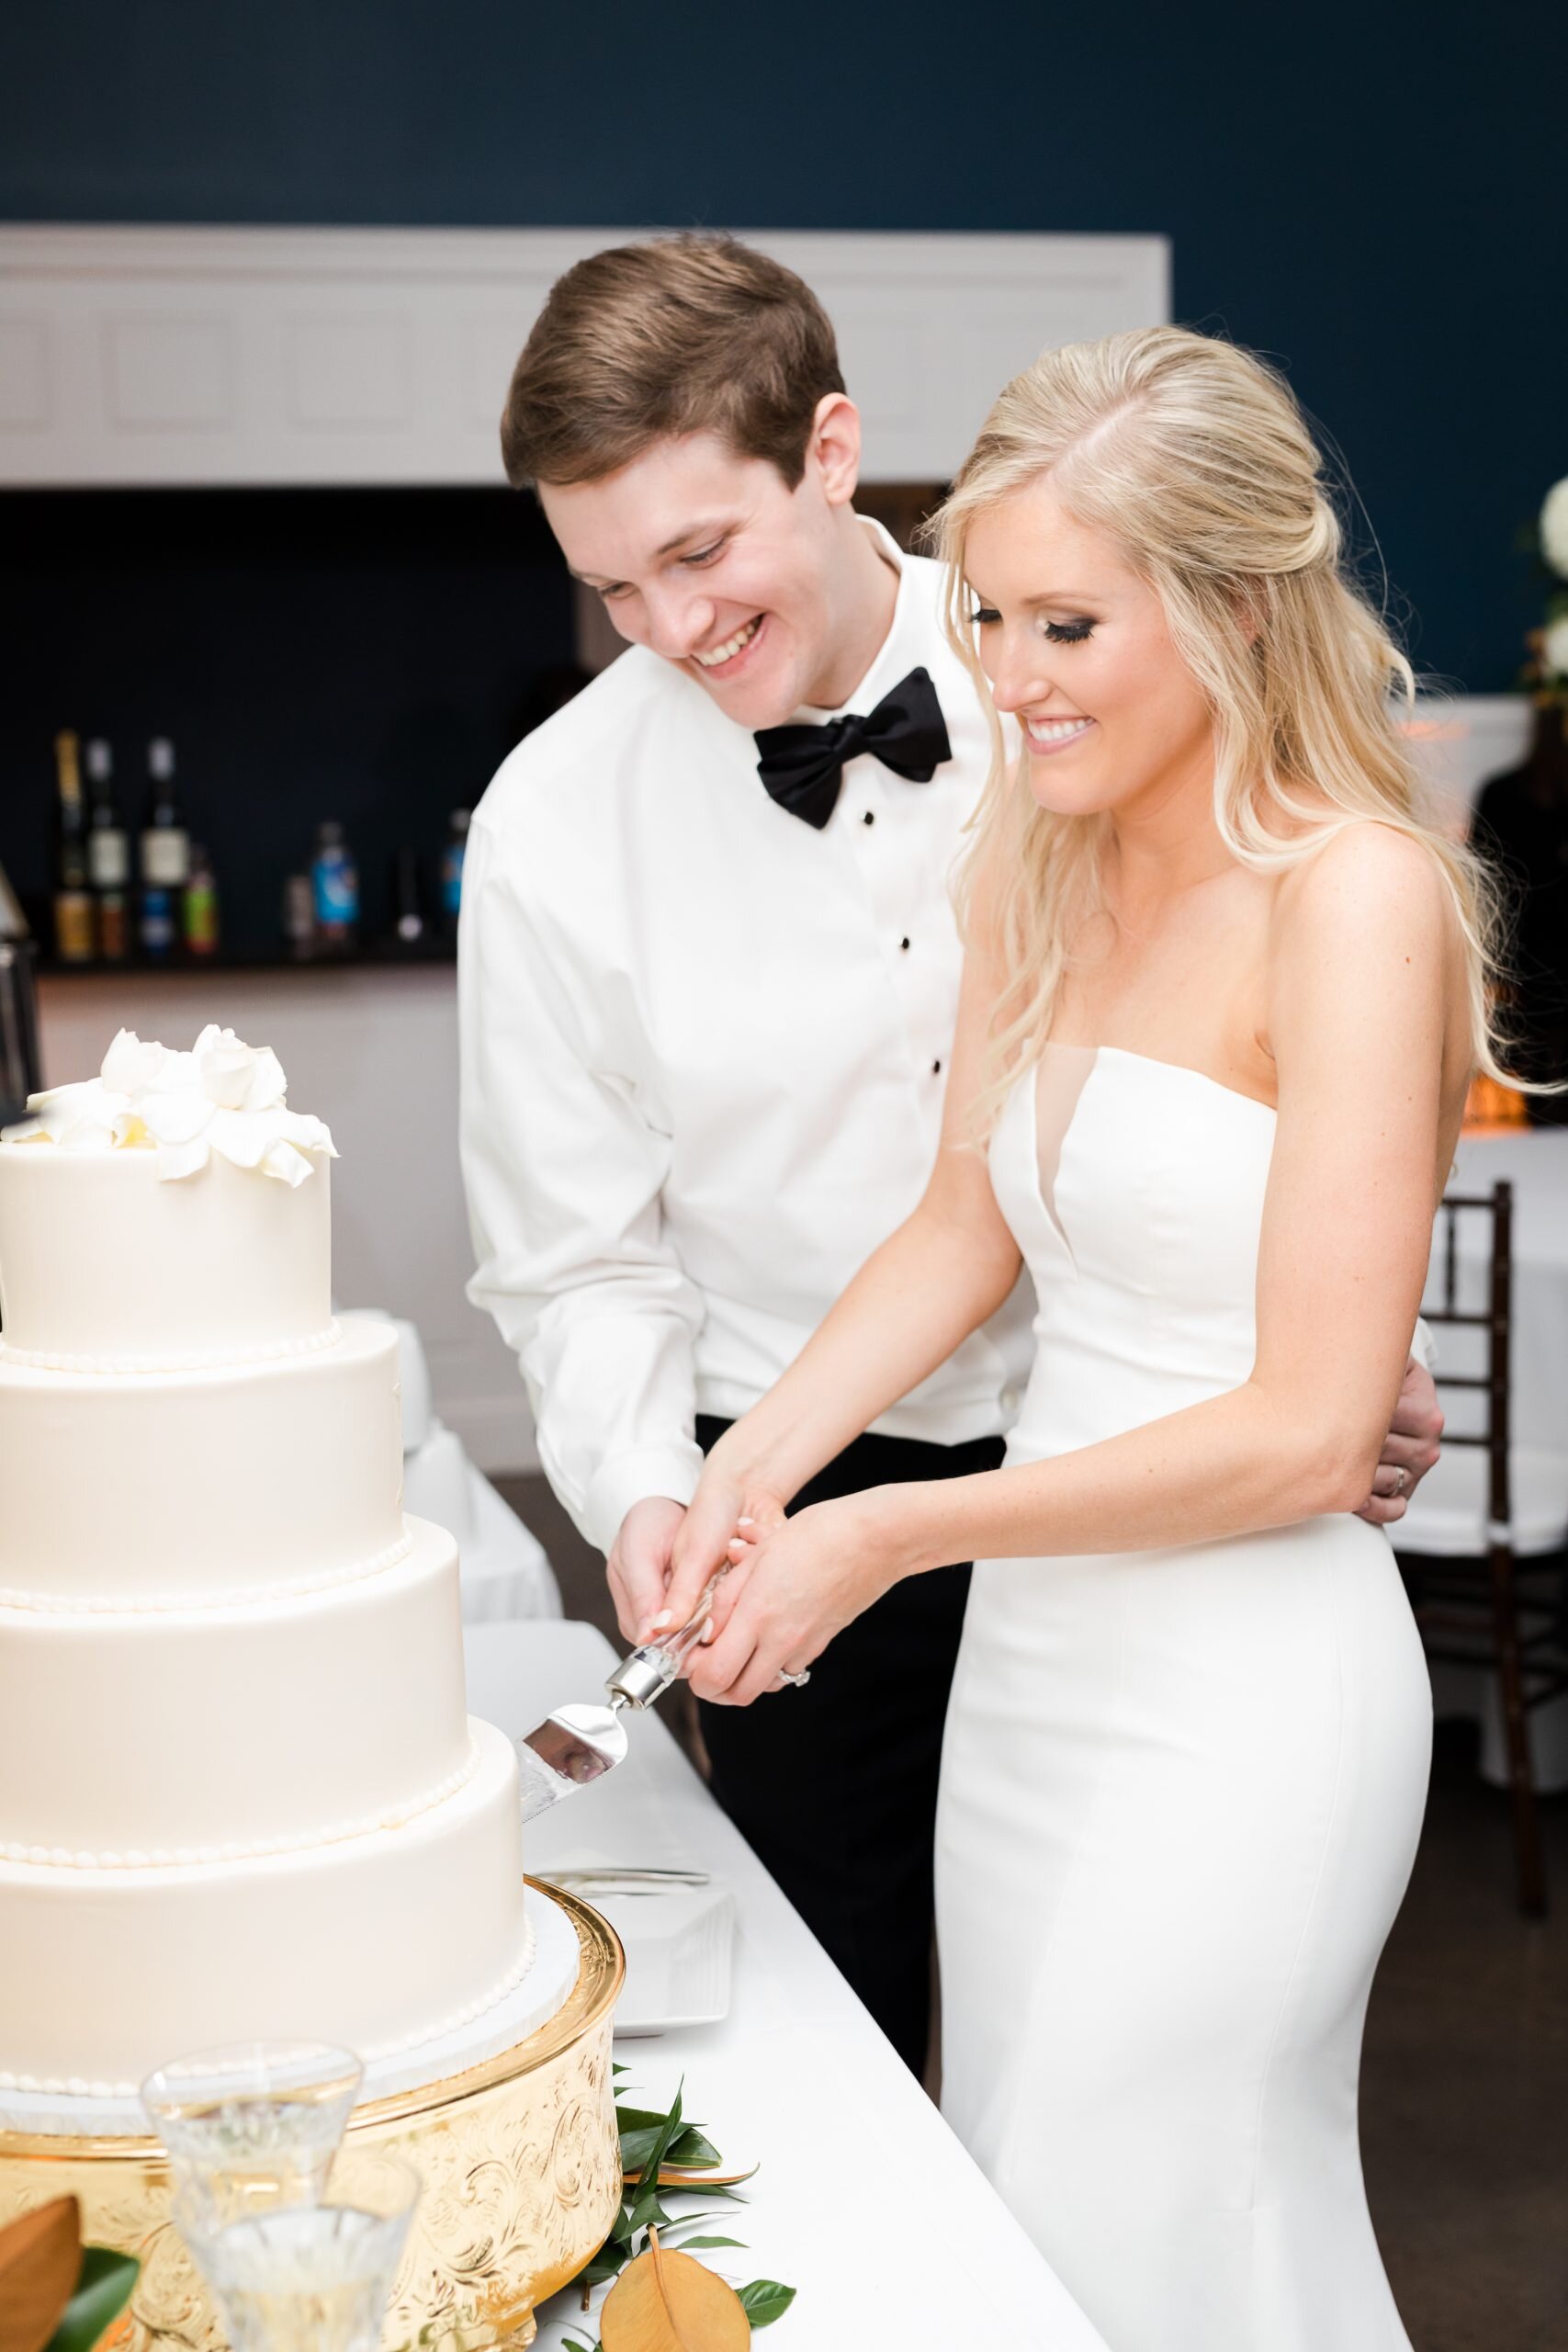 cake cutting pink champagne designs couple.jpg